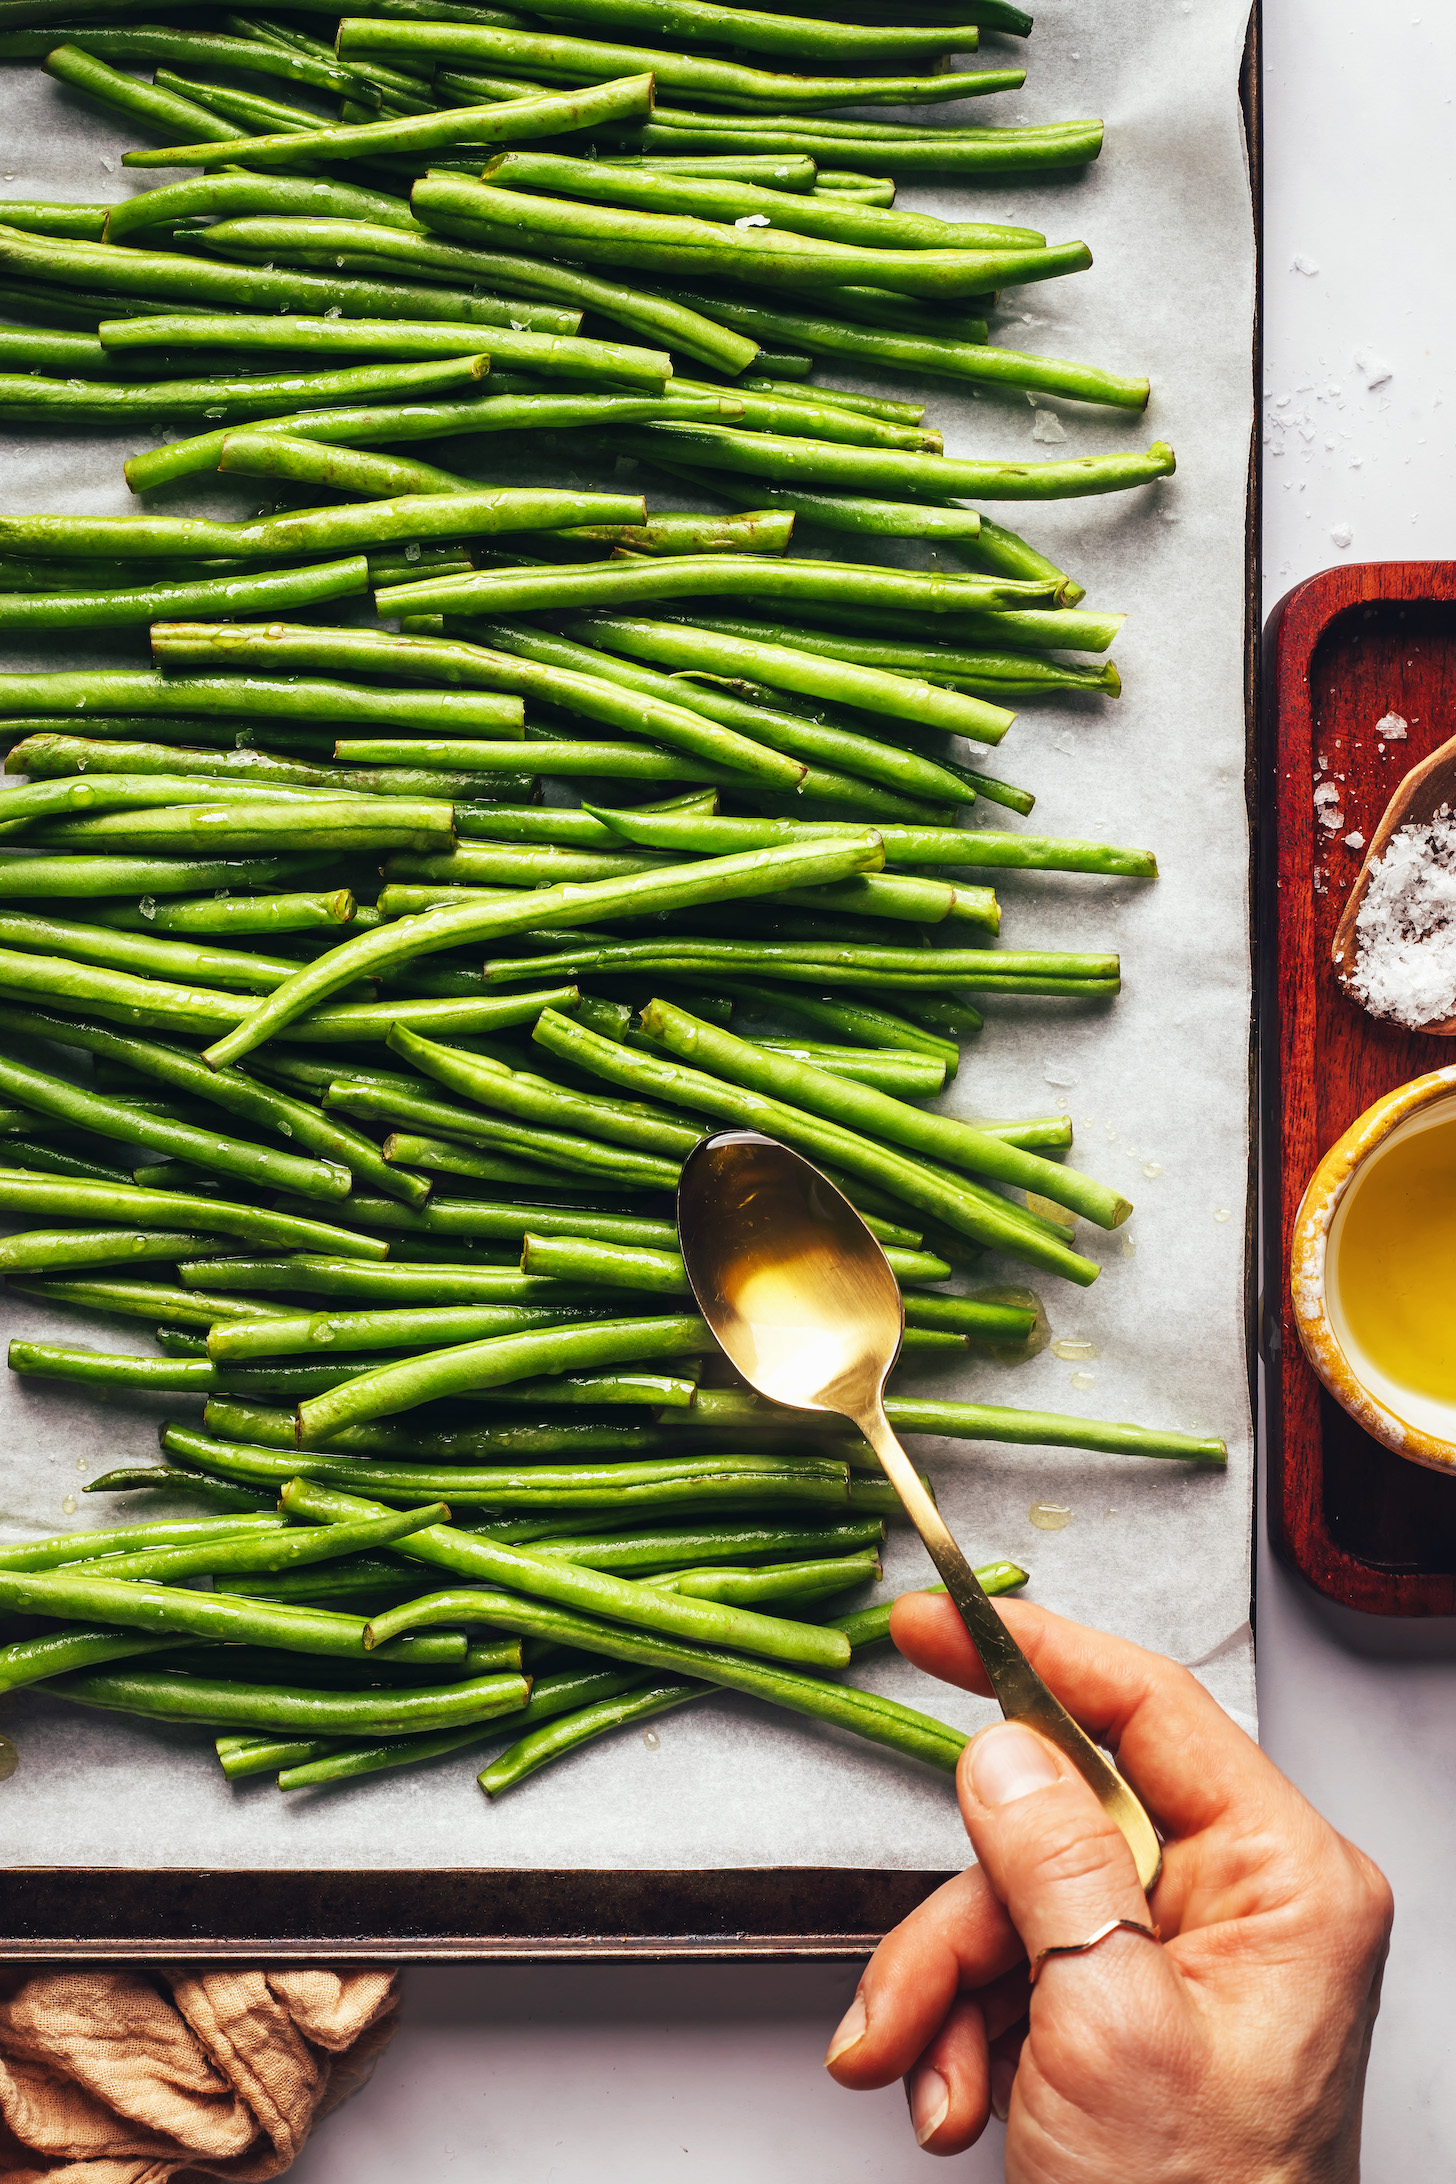 Use a spoon to drizzle olive oil over green beans on a baking sheet